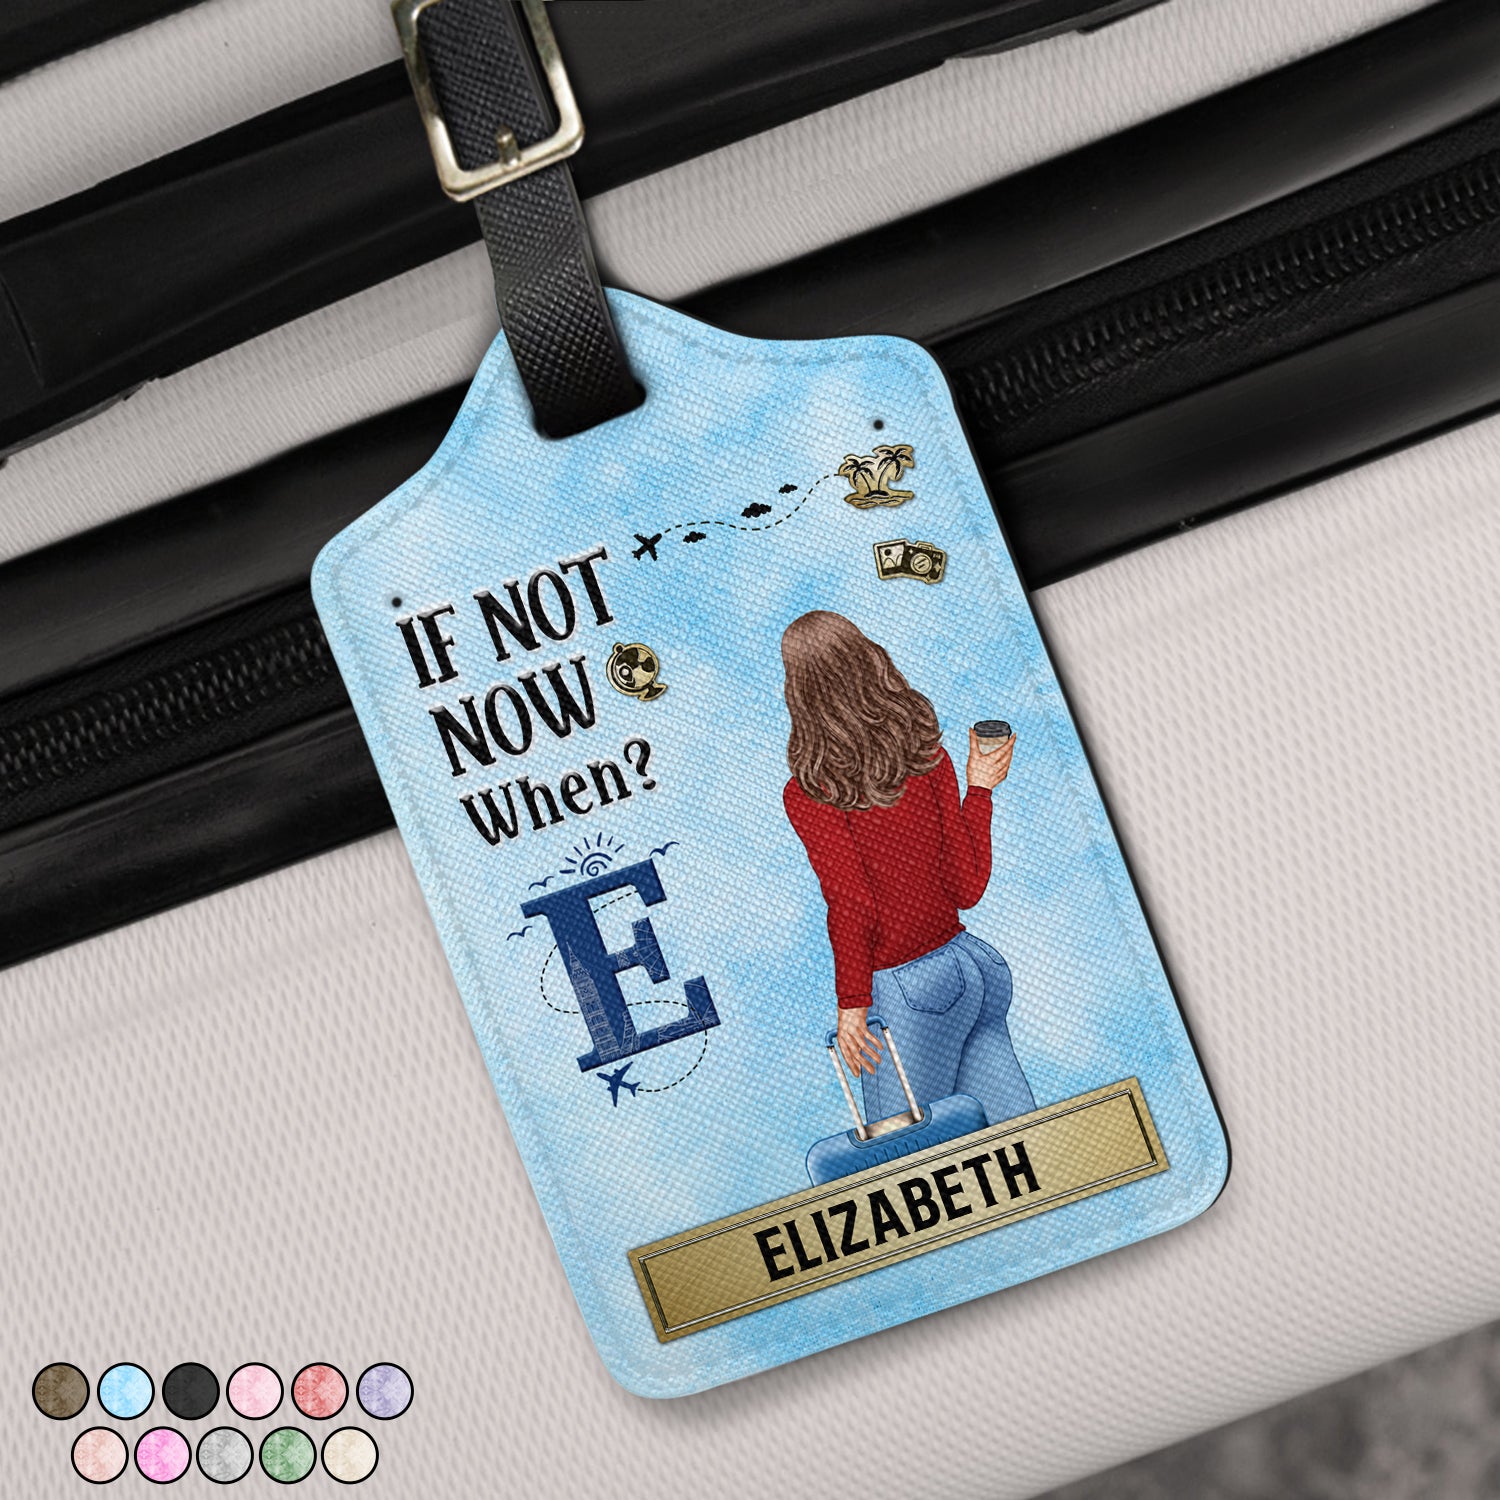 If Not Now When - Gift For Travelers, Traveling Lovers, Him, Her - Personalized Luggage Tag